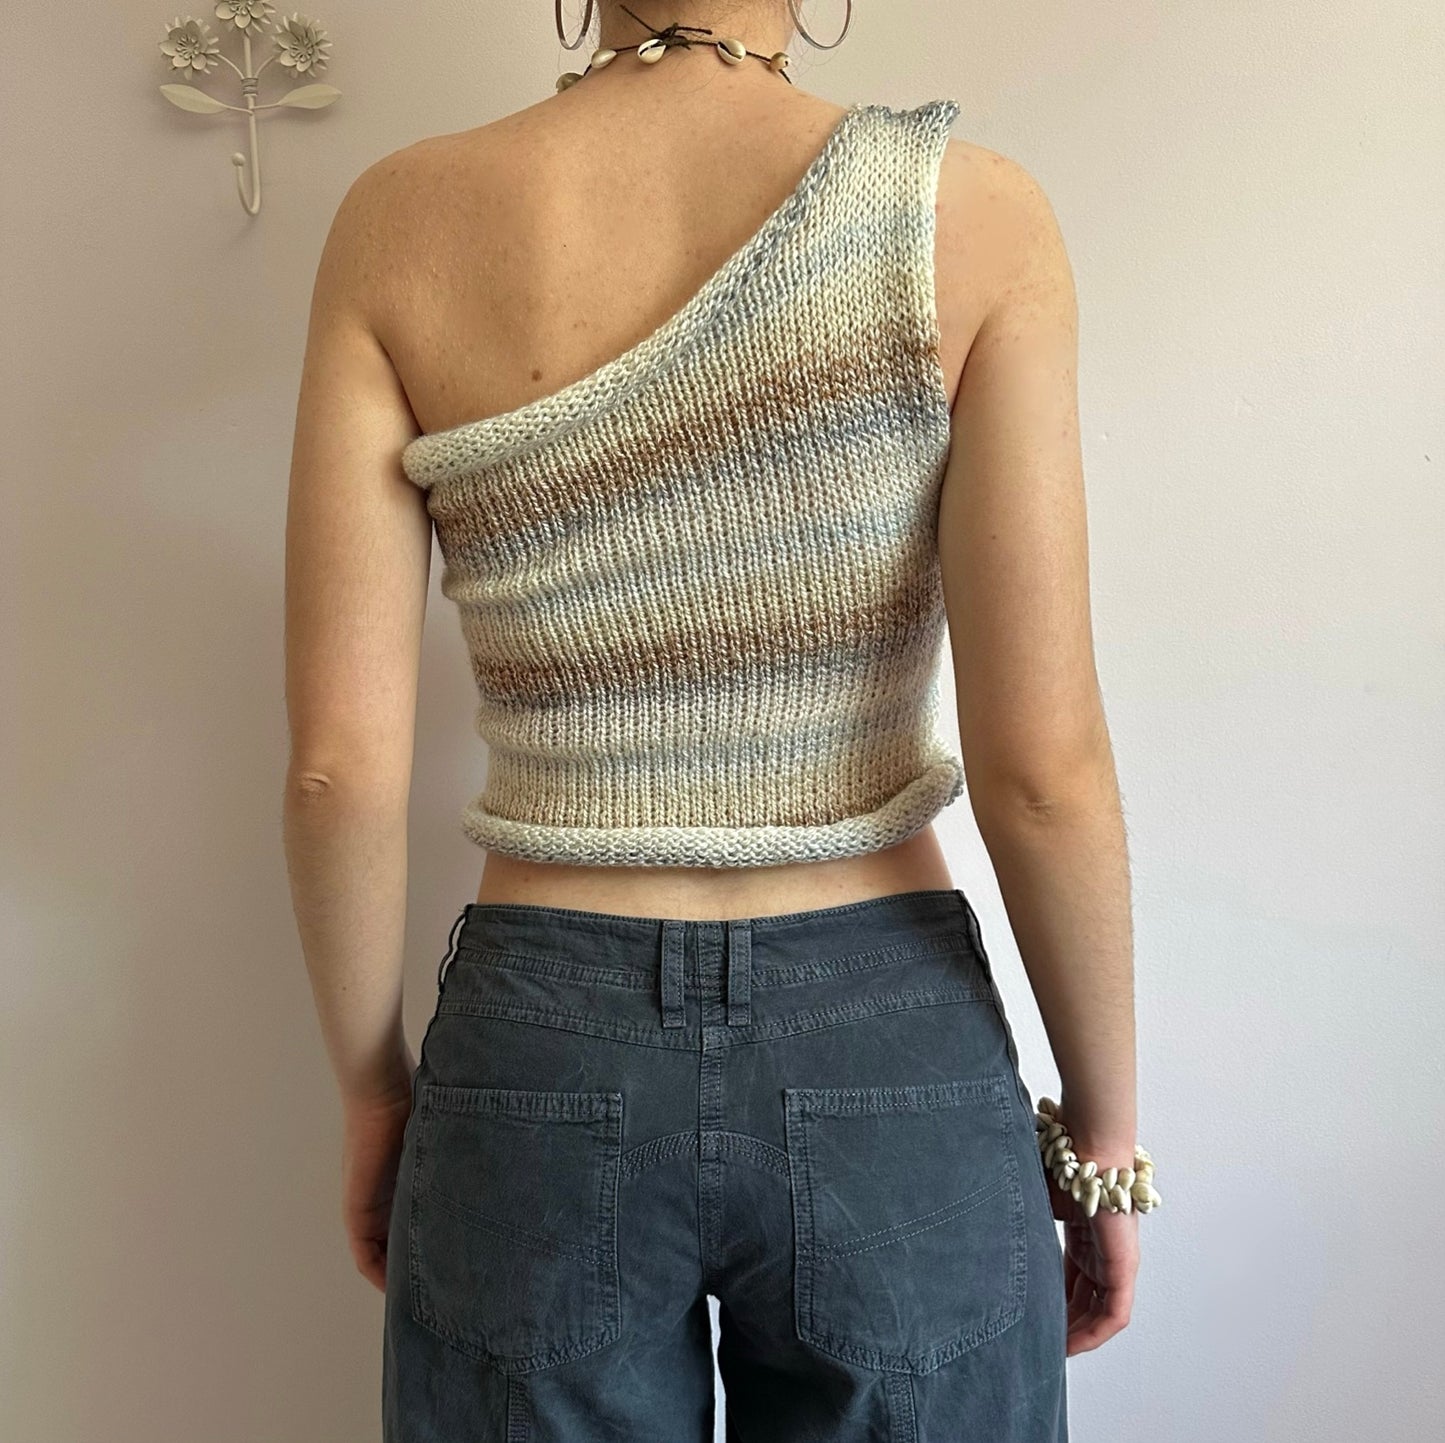 Handmade knitted one shoulder asymmetrical top in cream, baby blue and brown